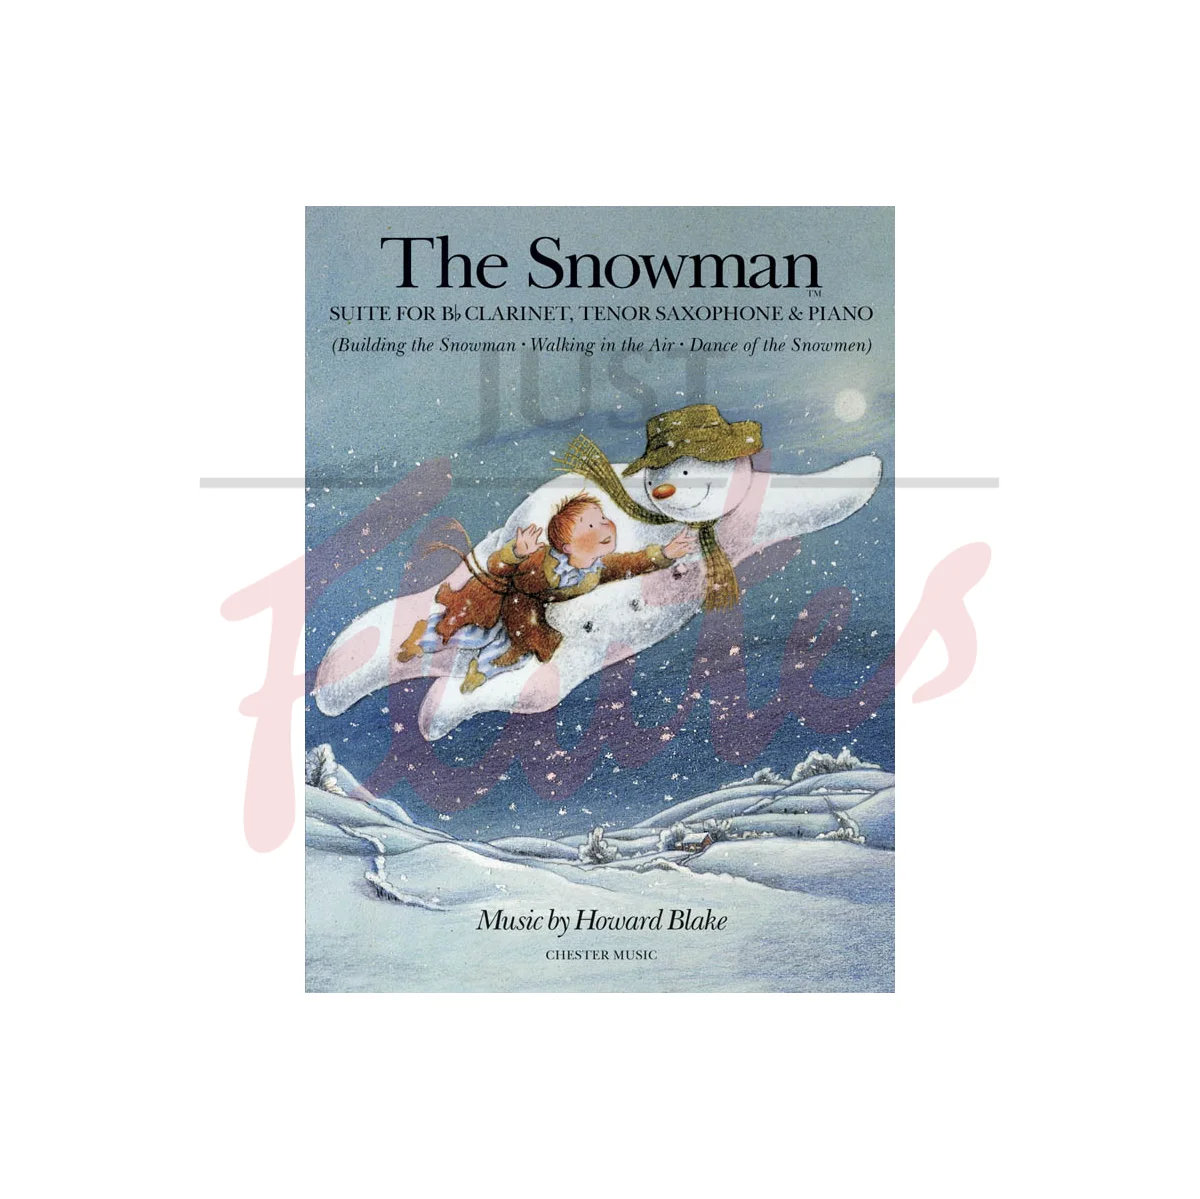 The Snowman Suite for Clarinet/Tenor Saxophone and Piano